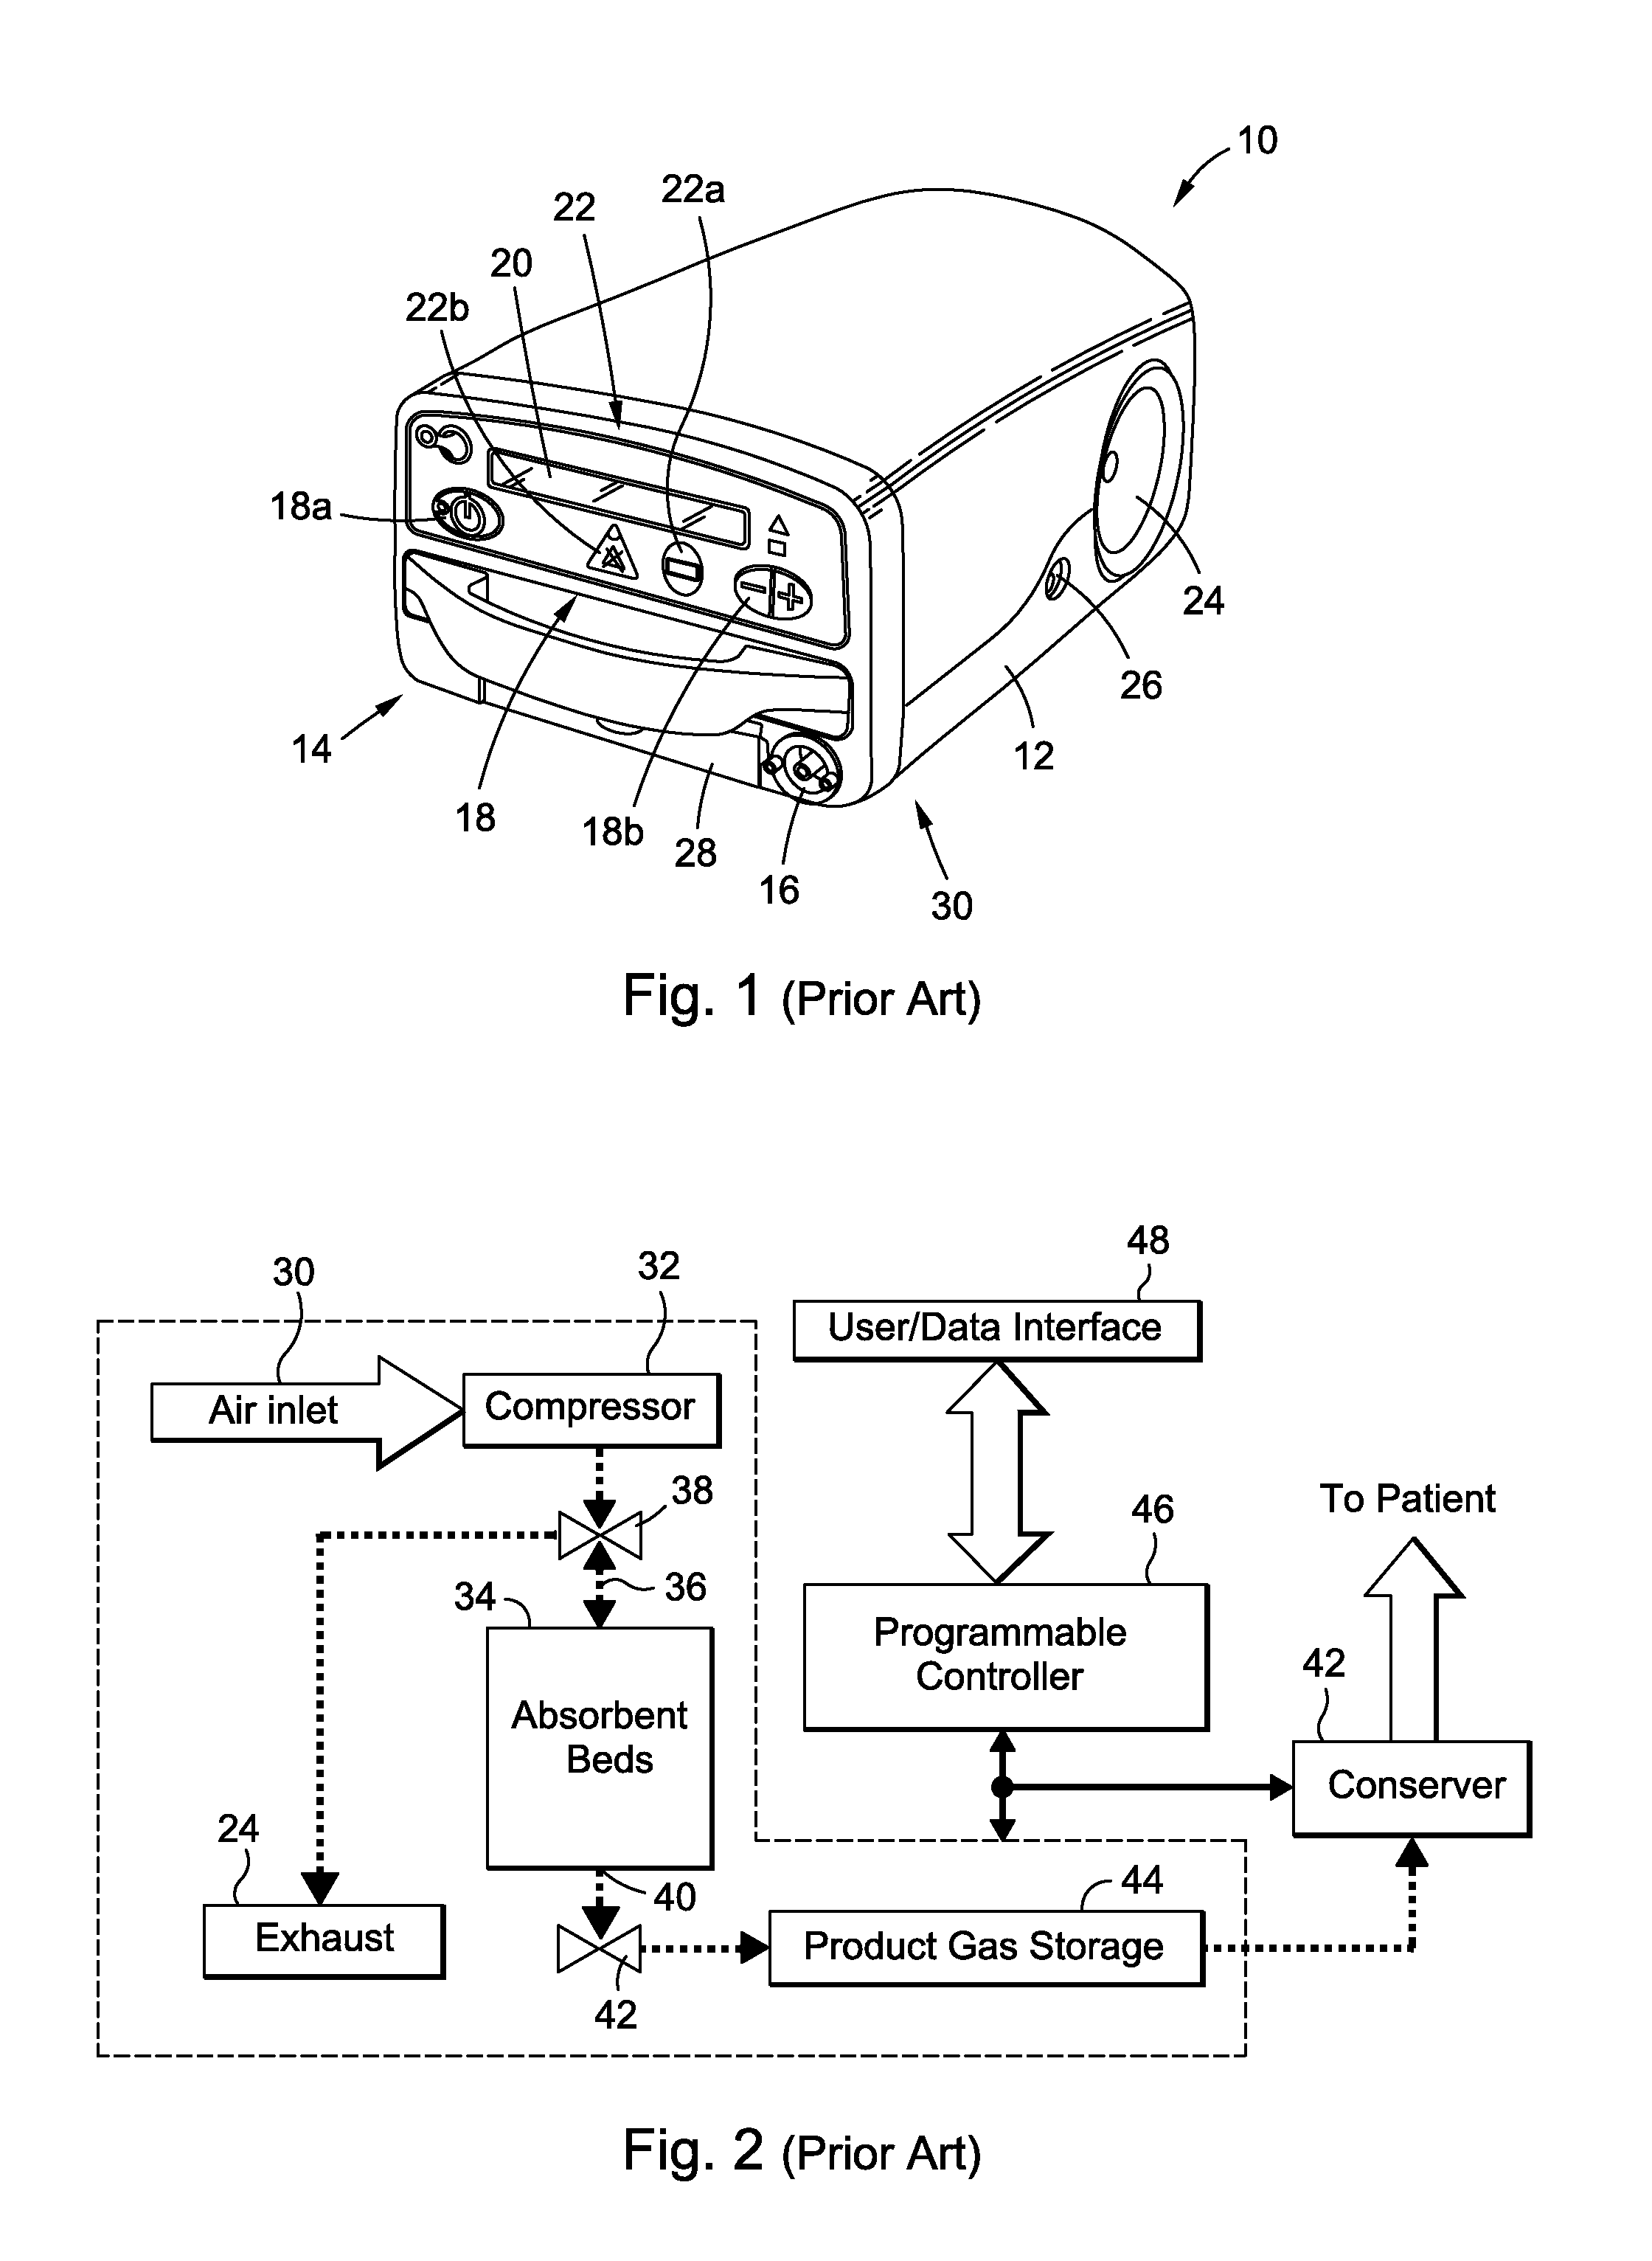 Oxygen concentrator for high pressure oxygen delivery with oxygen circulation loop and improved portability